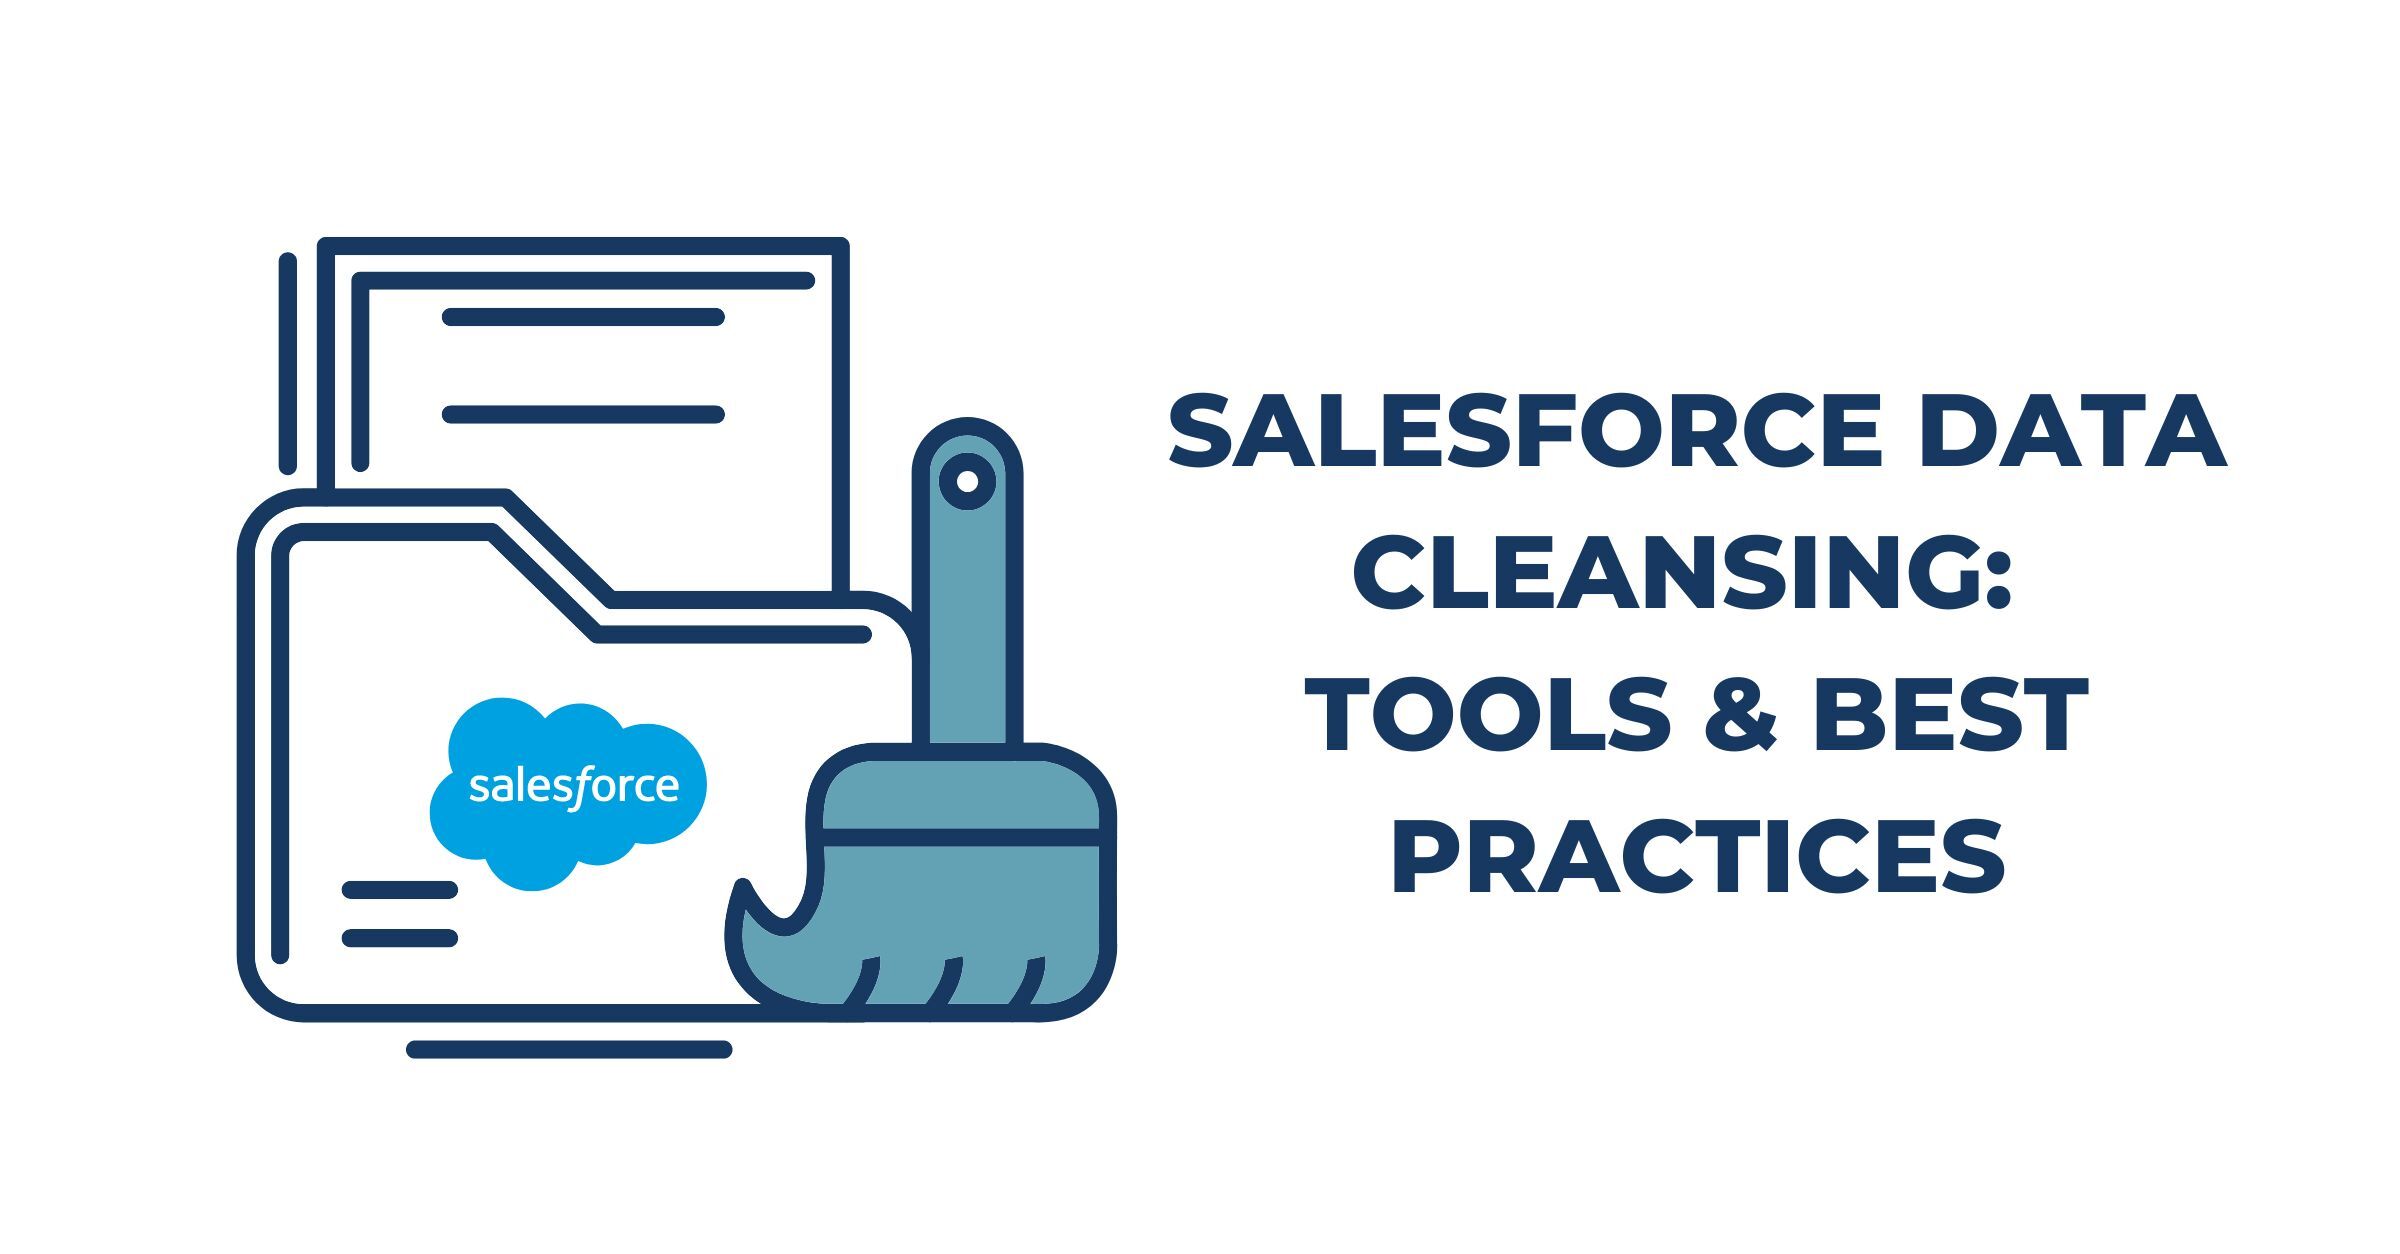 Salesforce Data Cleansing Tools & Best Practices